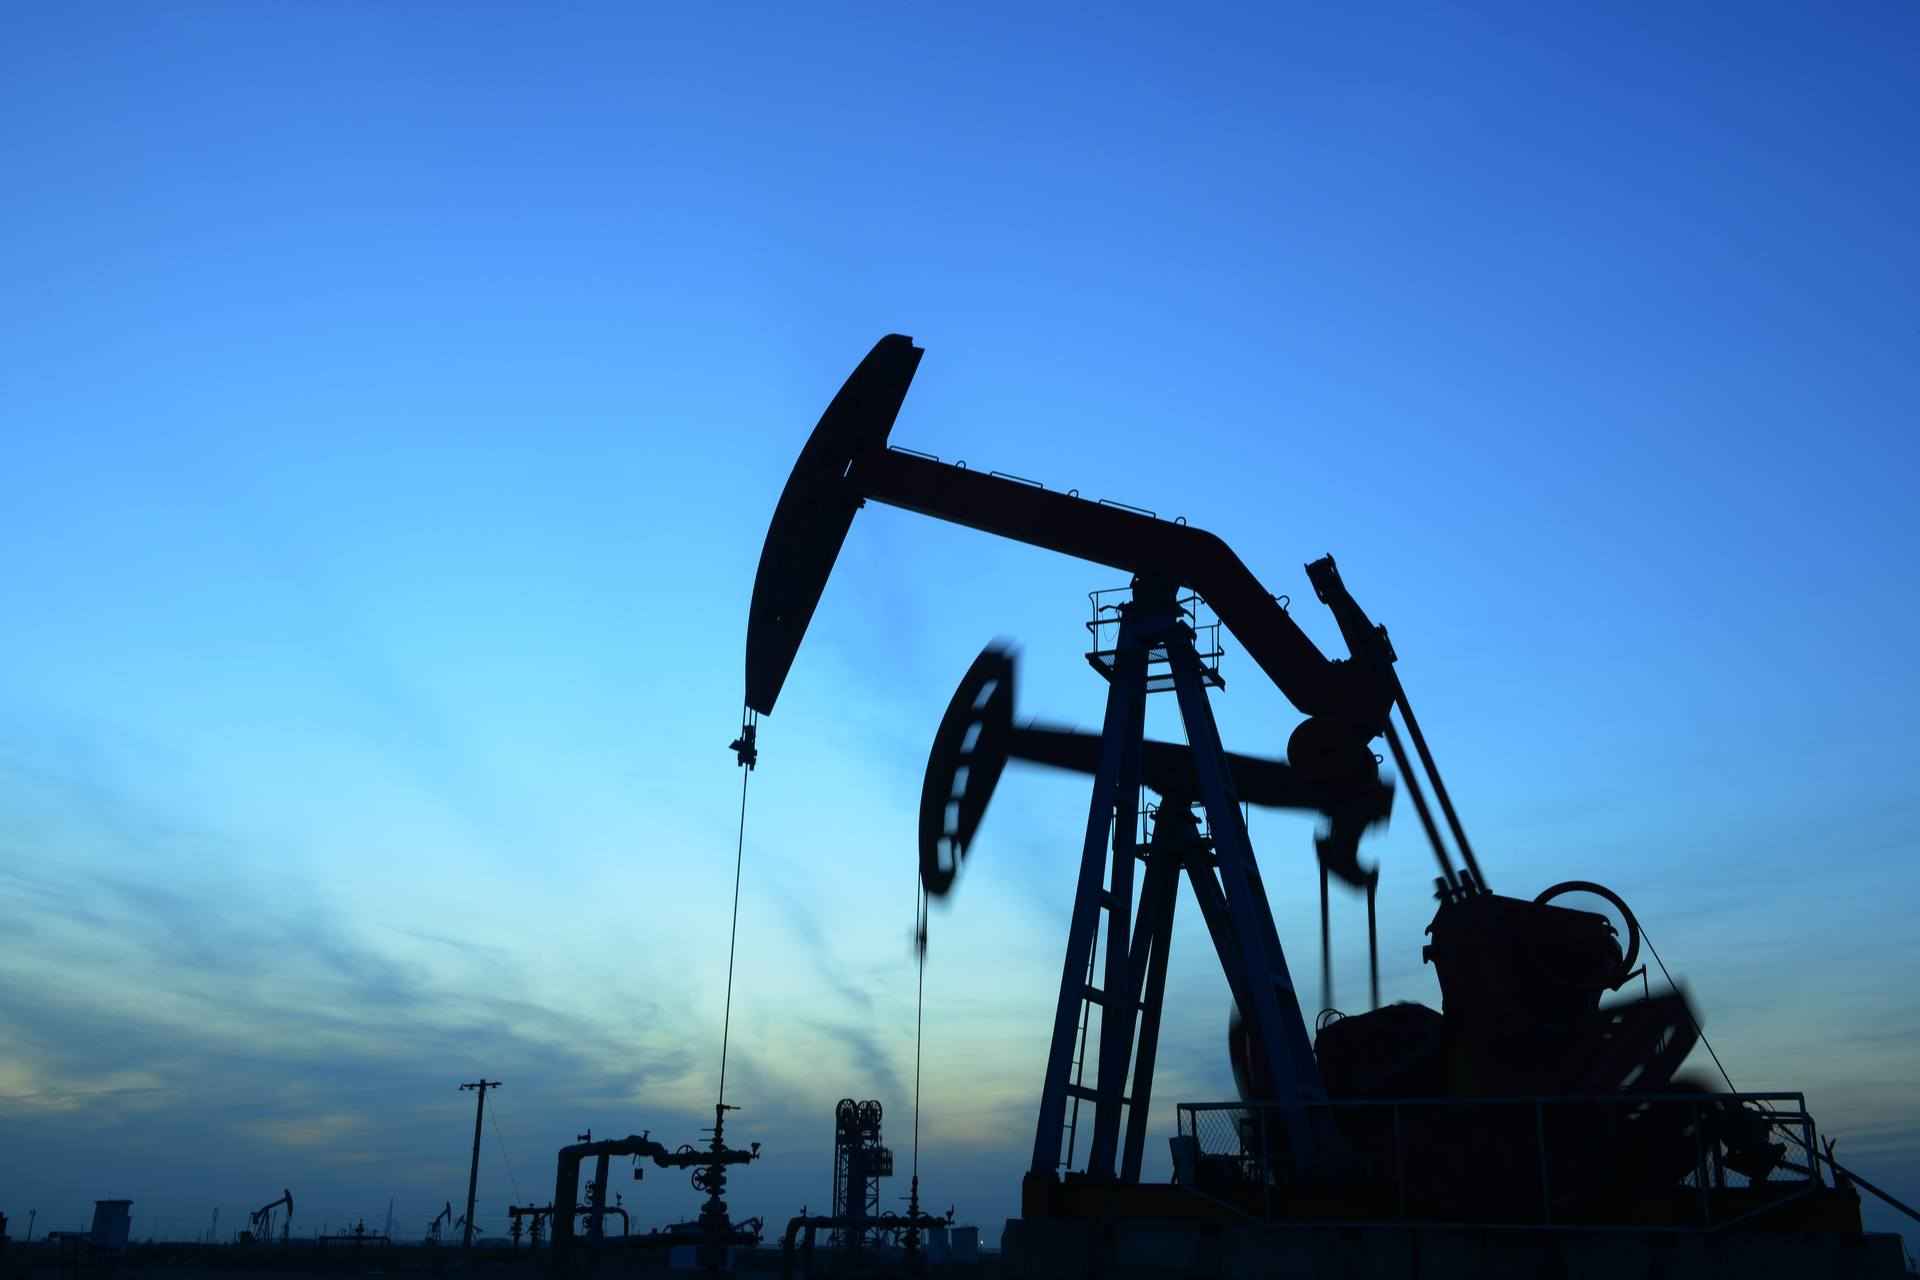 Will the EIA offer crude oil a glimmer of hope?